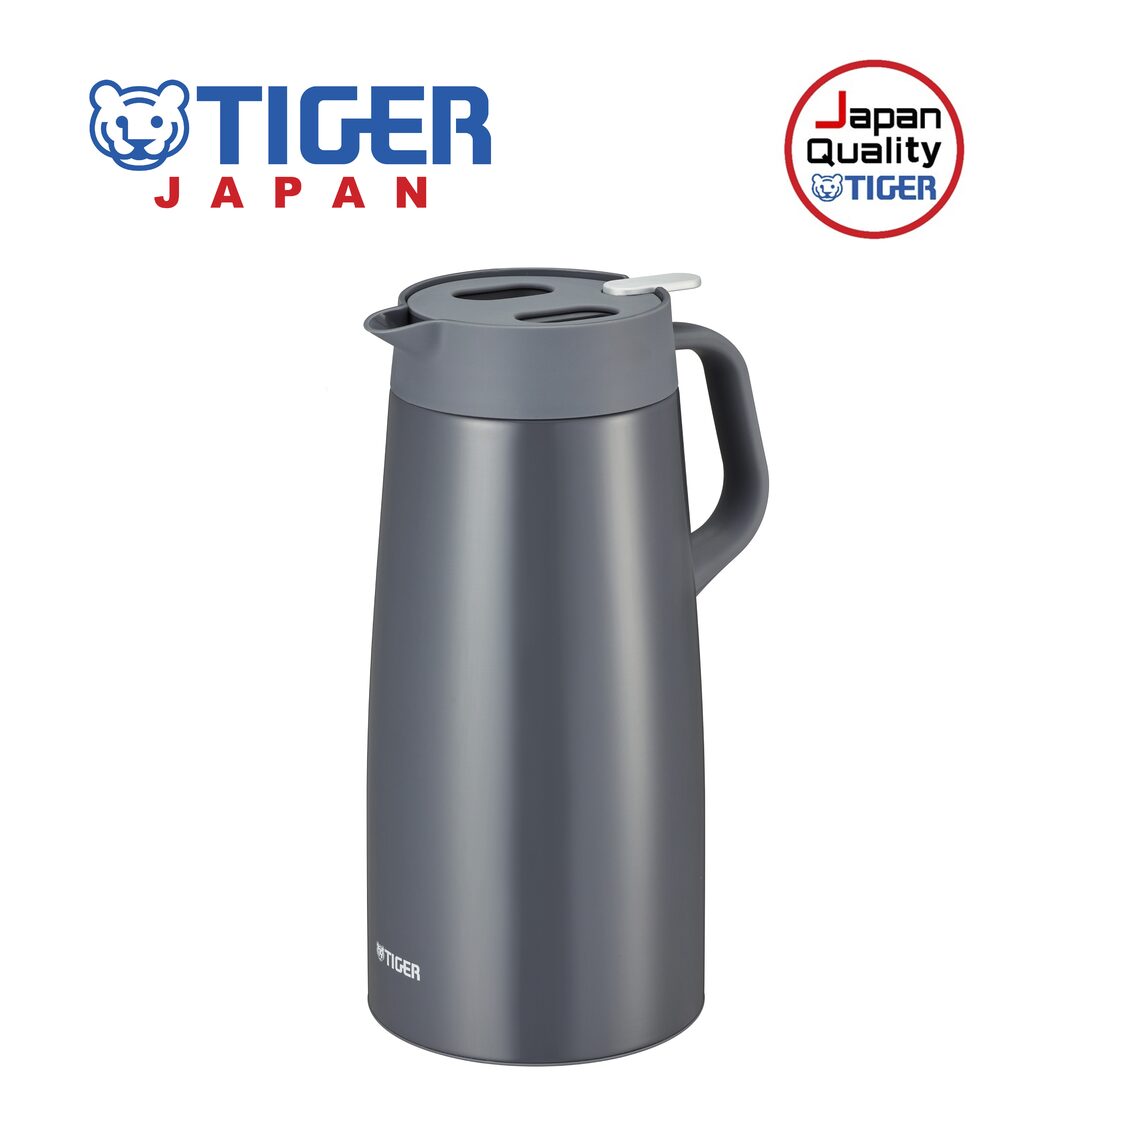 Tiger 20L Double Stainless Steel Handy Jug - Dark Gray PWO-A200 HD